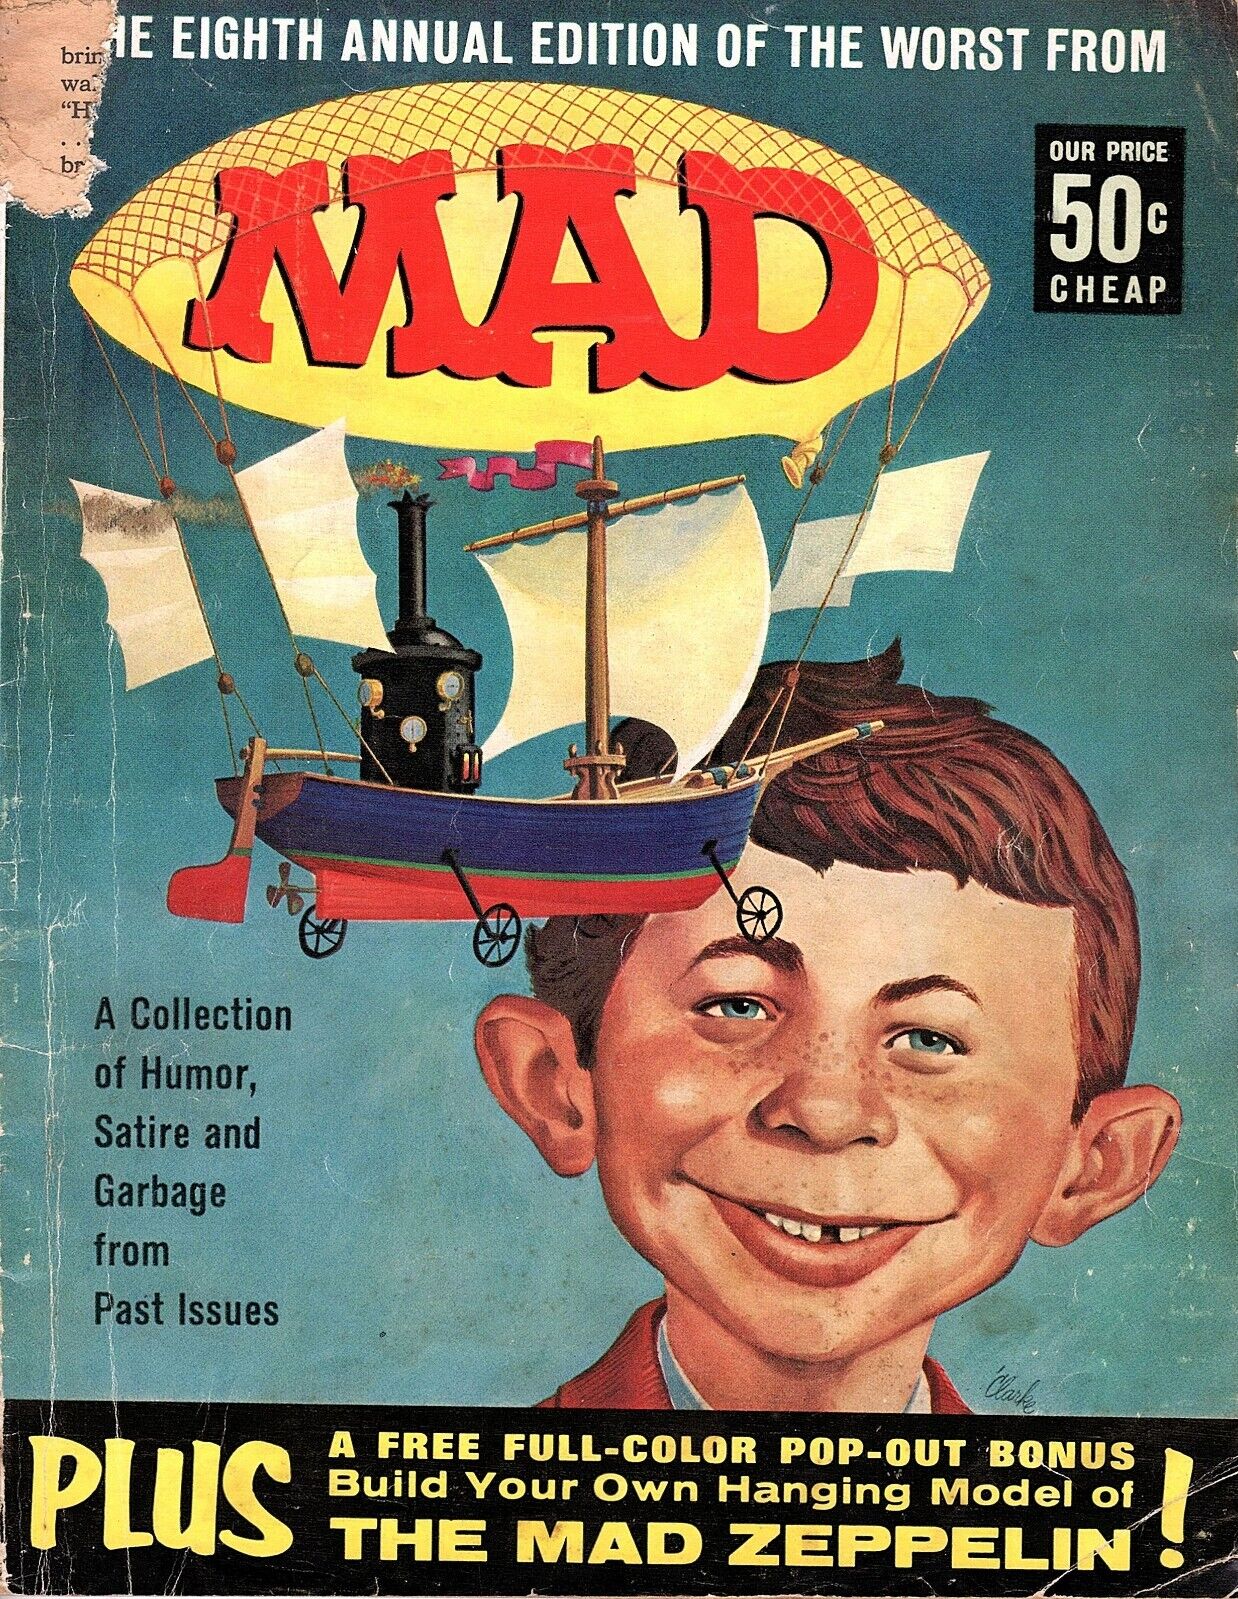 1965 MAD Magazine ,The EIGHTH Annual Edition Of The Worst from MAD